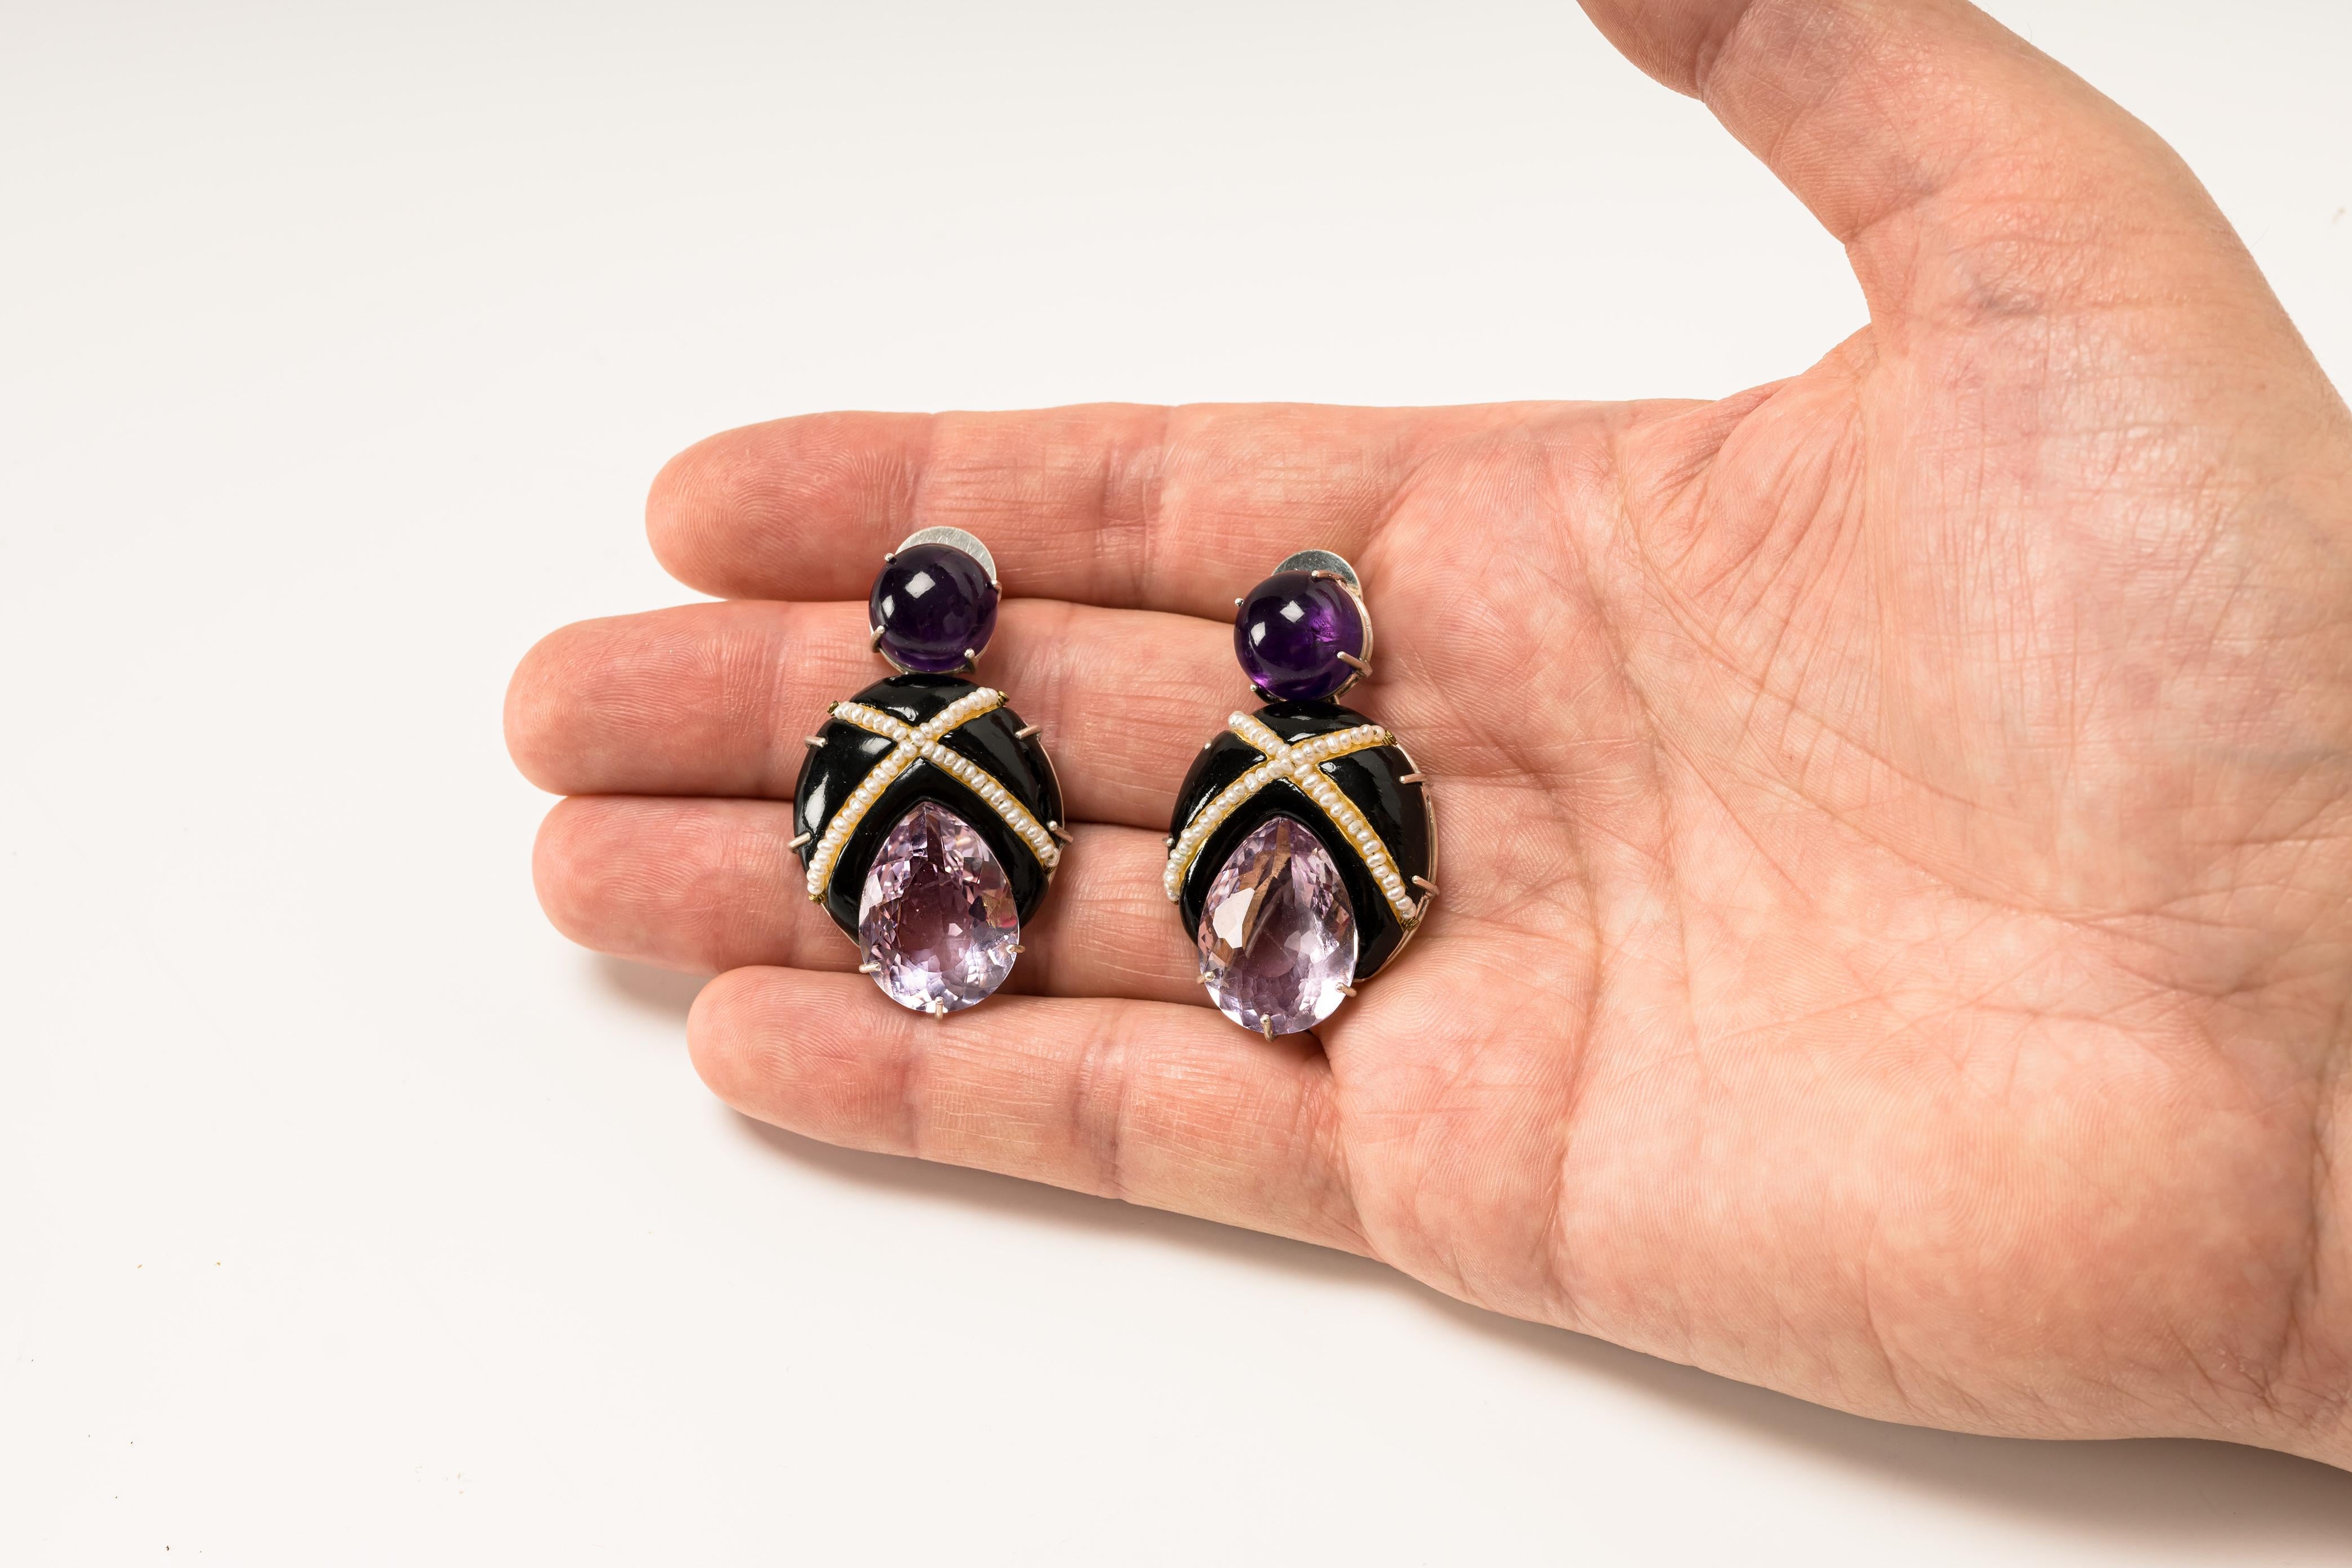 Earrings “ Simeio”, 2022, are a one-of-a-kind contemporary author jewelry by italian artist Gian Luca Bartellone.
Materials: papier-mâché, gold 18kt, silver, amethysts, pearls, gold leaf 22kt.

The main body is made of papier-mâché and is